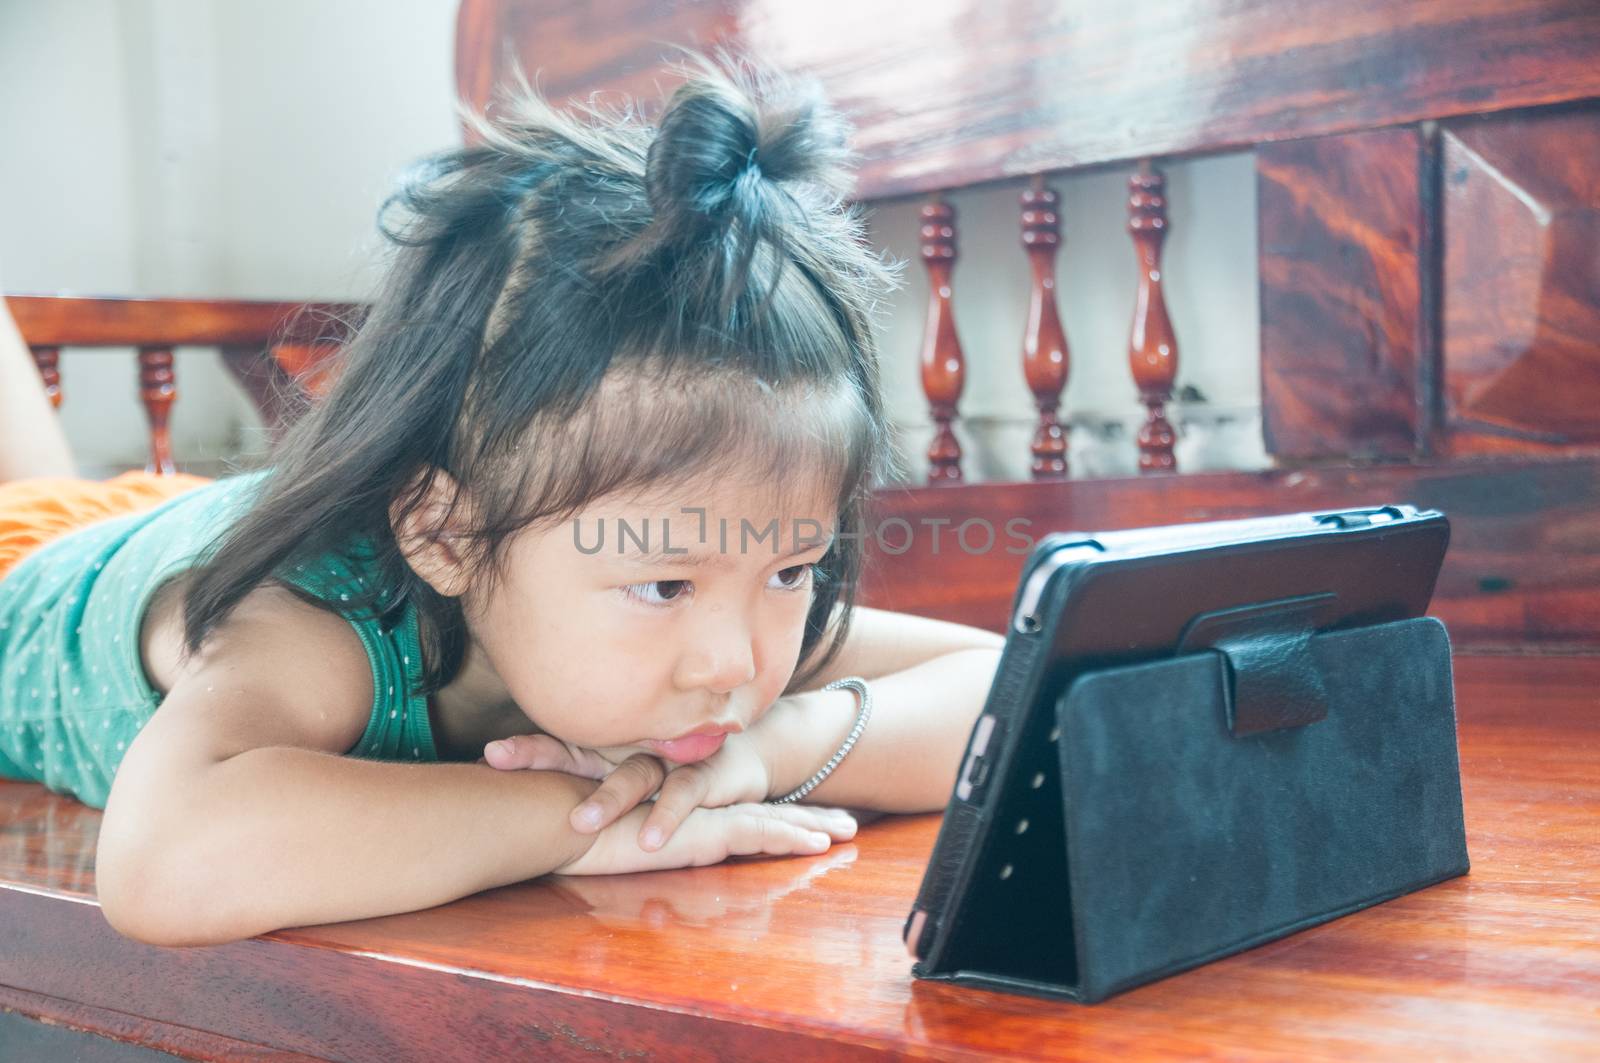 Unhappy Young Girl lying on wooden stool and Learning online course on Wireless Digital Tablet while staying at home in situation of Corona Virus or Covid 19 outbreak.